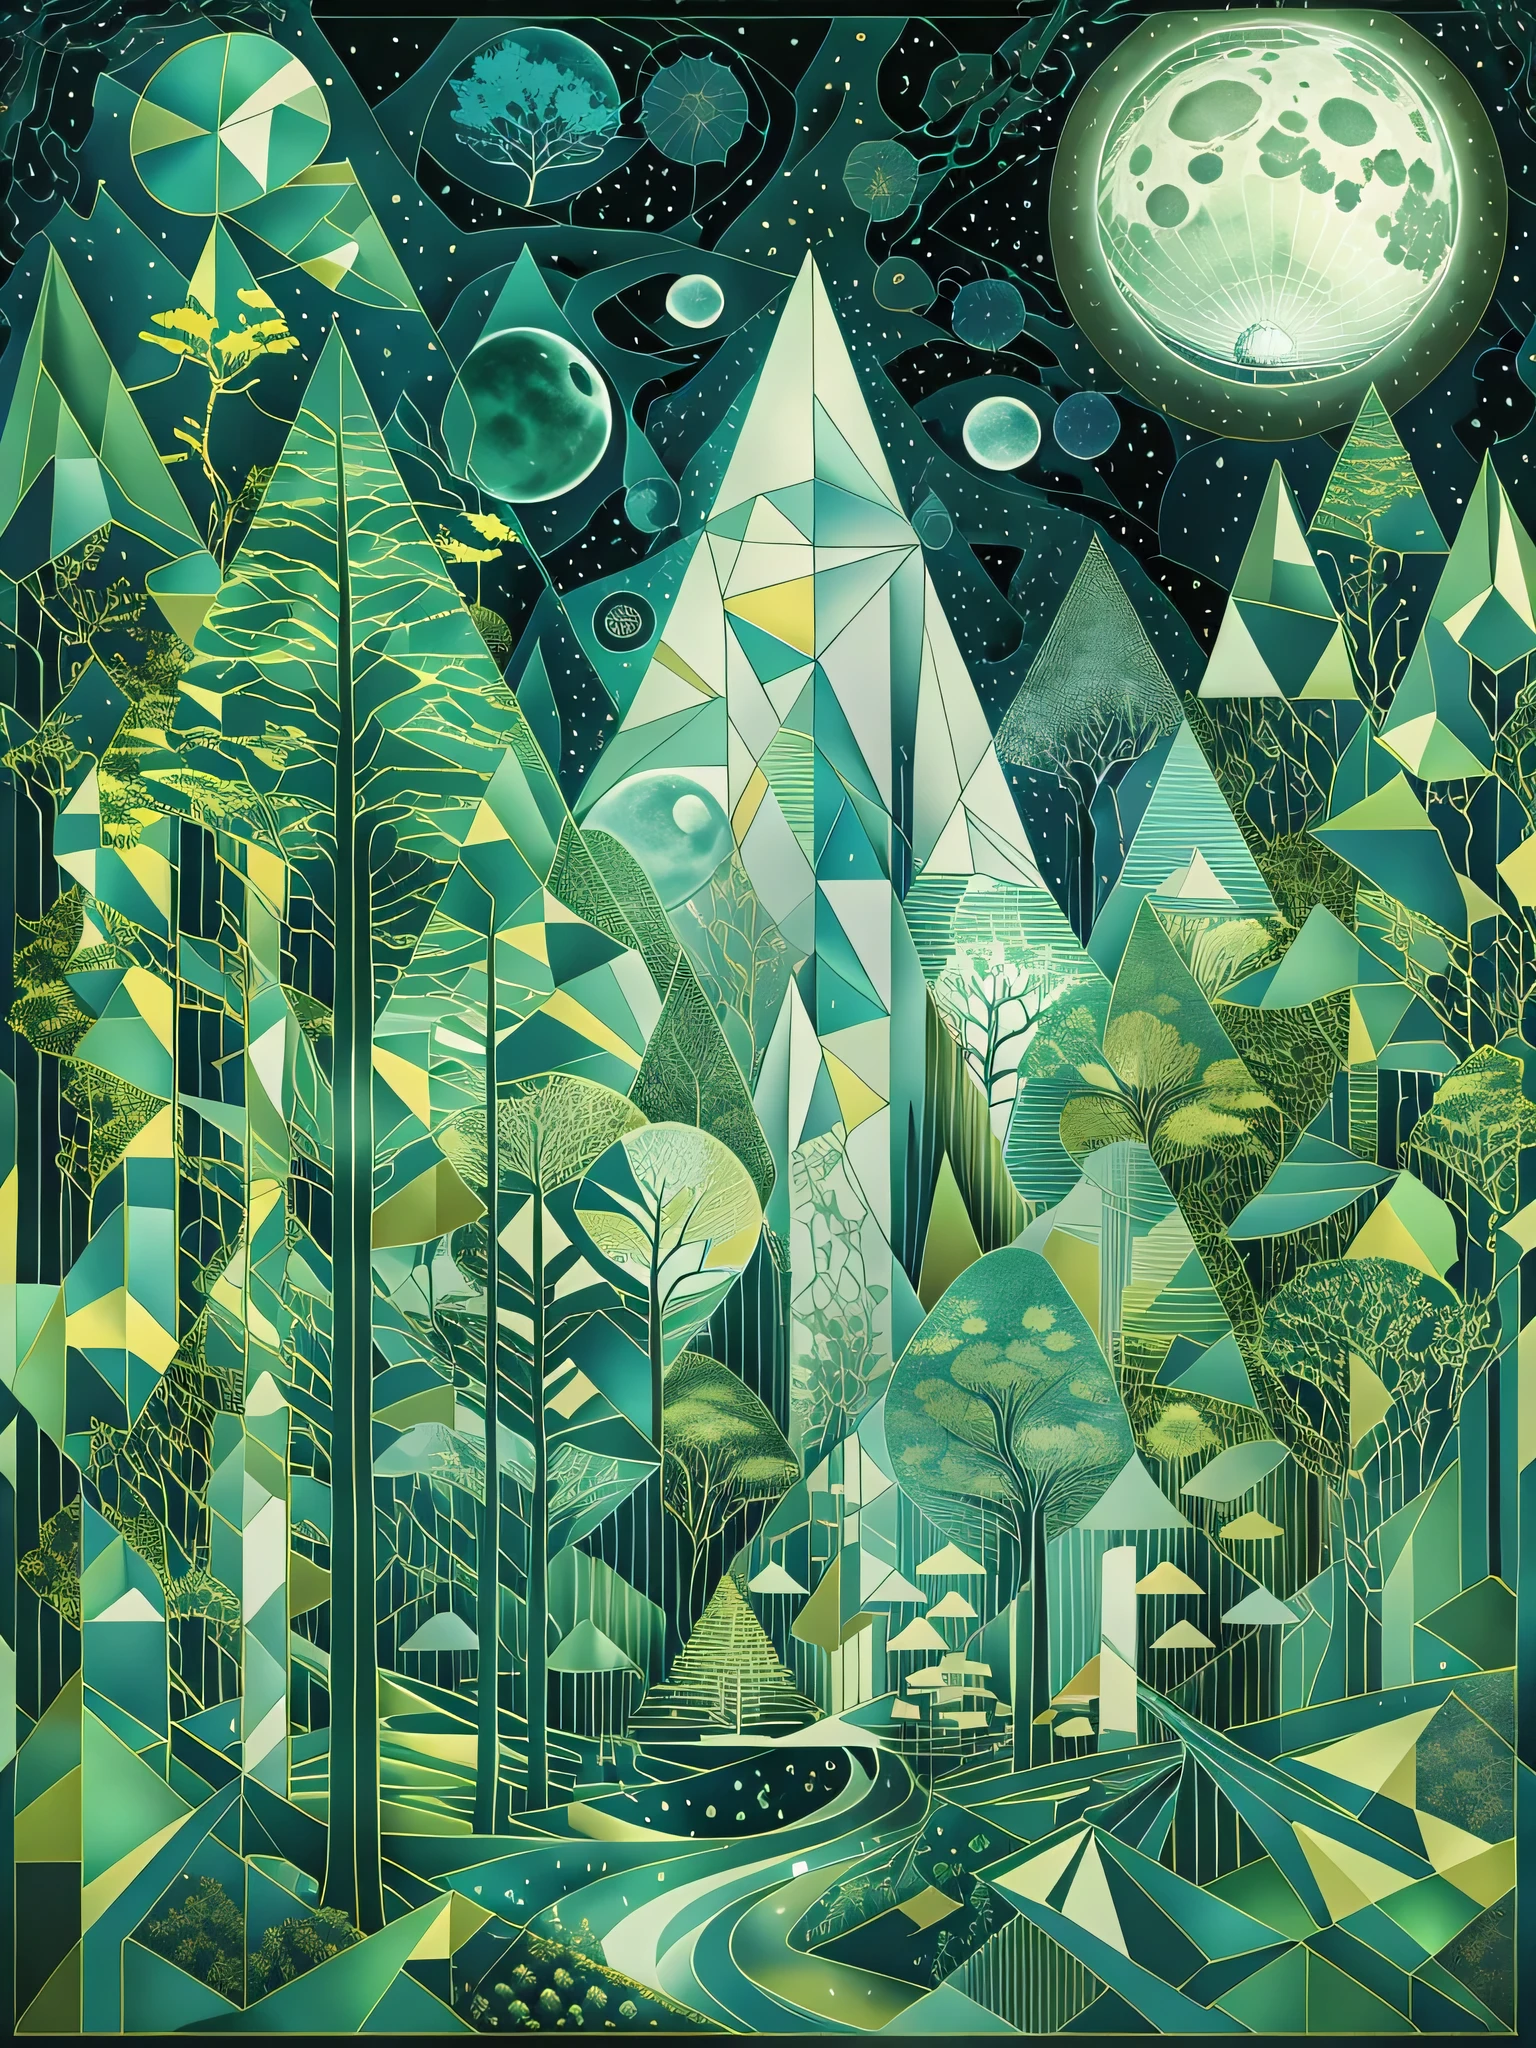 Lunar Glade envelops us in a magical moonlit forest scene constructed from fractured planes. Shards of blue, green, and white overlap to form a shimmering forest glade, the geometric foliage glinting as if beset with dewdrops. The otherwise perplexing intersection of triangular tree shapes is given context by the perfect full moon hovering above, its glowing white form casting a soft polynomials overlay the scene, their edges smoothed by the lunar glow.

Though the abstracted forms confuse the eye at first glance, focus on the serene moon at the artwork's pinnacle serves to orient the viewer within this cubist nighttime haven. Backlit leaves fractured into countless prismatic shards ripple in an unfelt breeze. The strange dimensionality of the scene reinforces the mystique of the forest at night, where the moon's revealing light plays tricks with perception and shadow. Lunar Glade provides a portal into an enchanted woodland realm, the moonlight filtering through the fractured shapes to transport us in lucid dreaming to a place where geometry and nature intertwine.